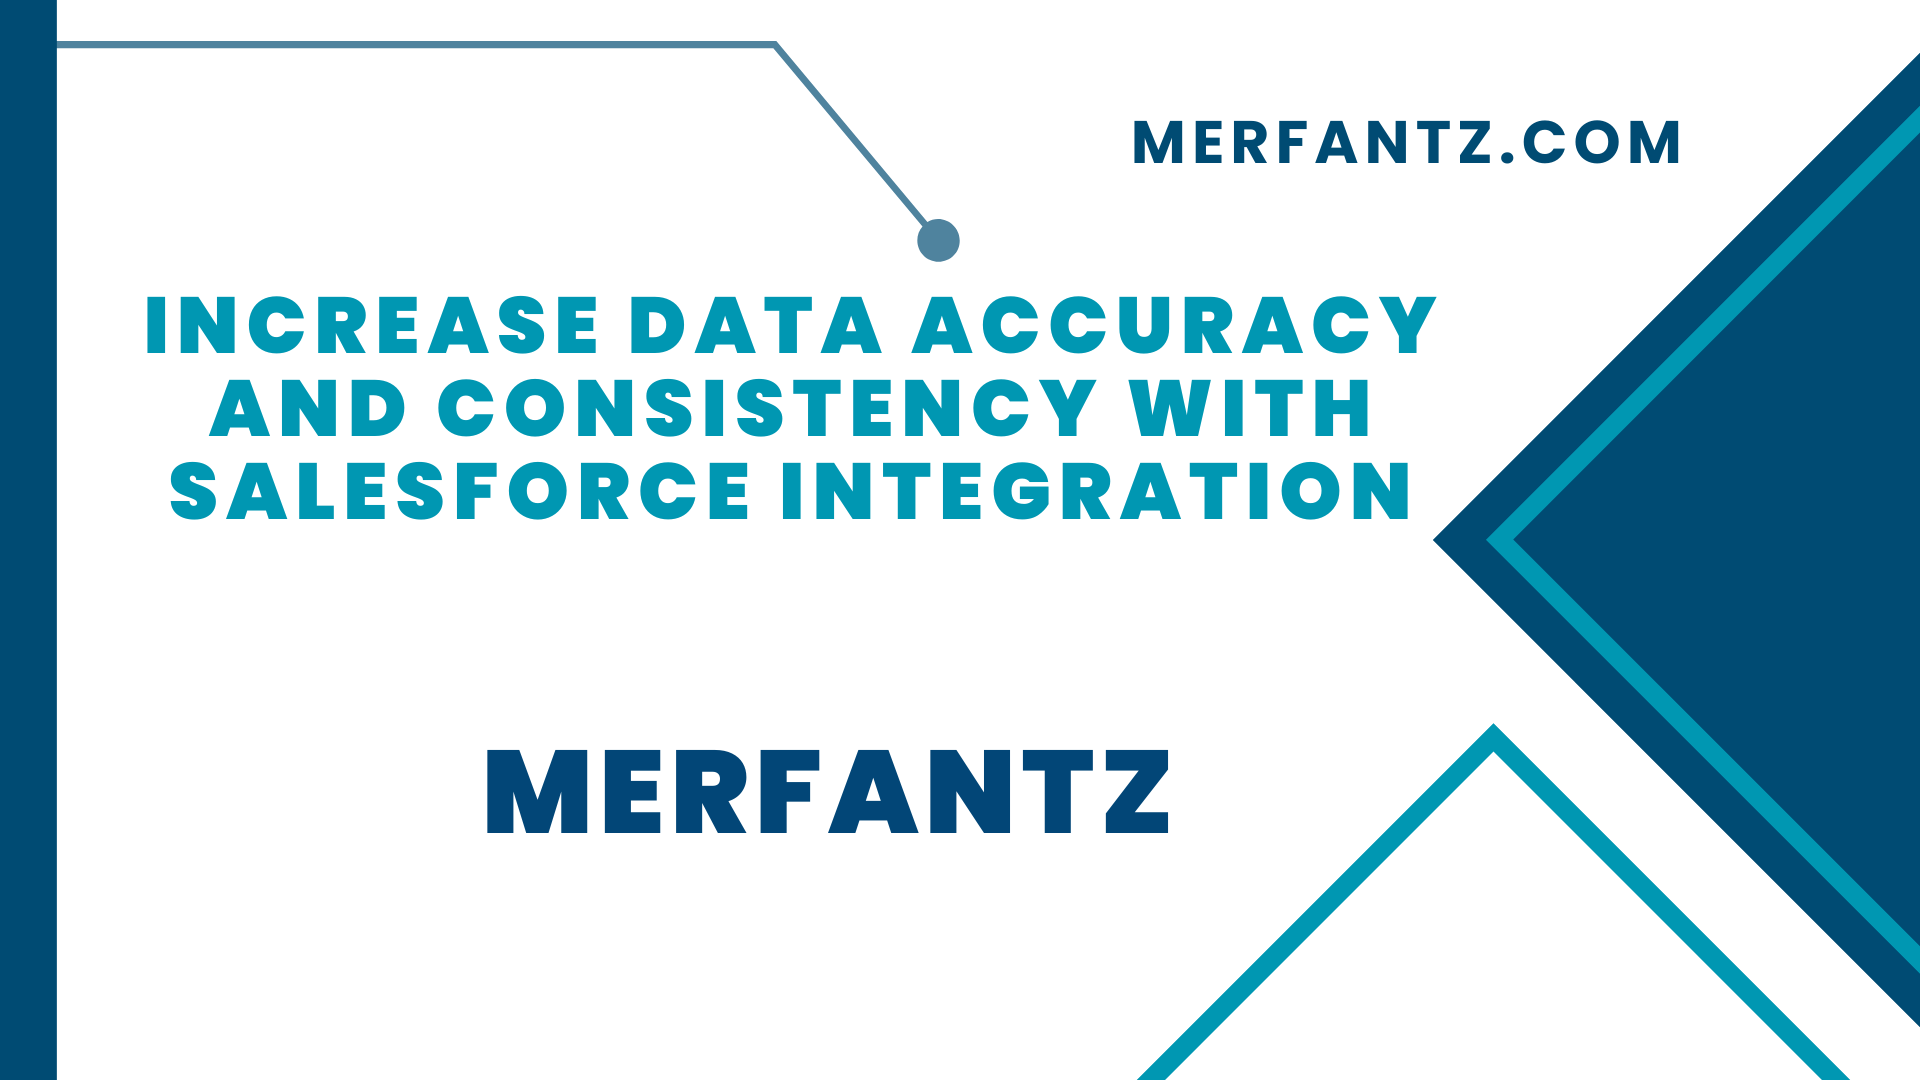 Increase Data Accuracy and Consistency with Salesforce Integration